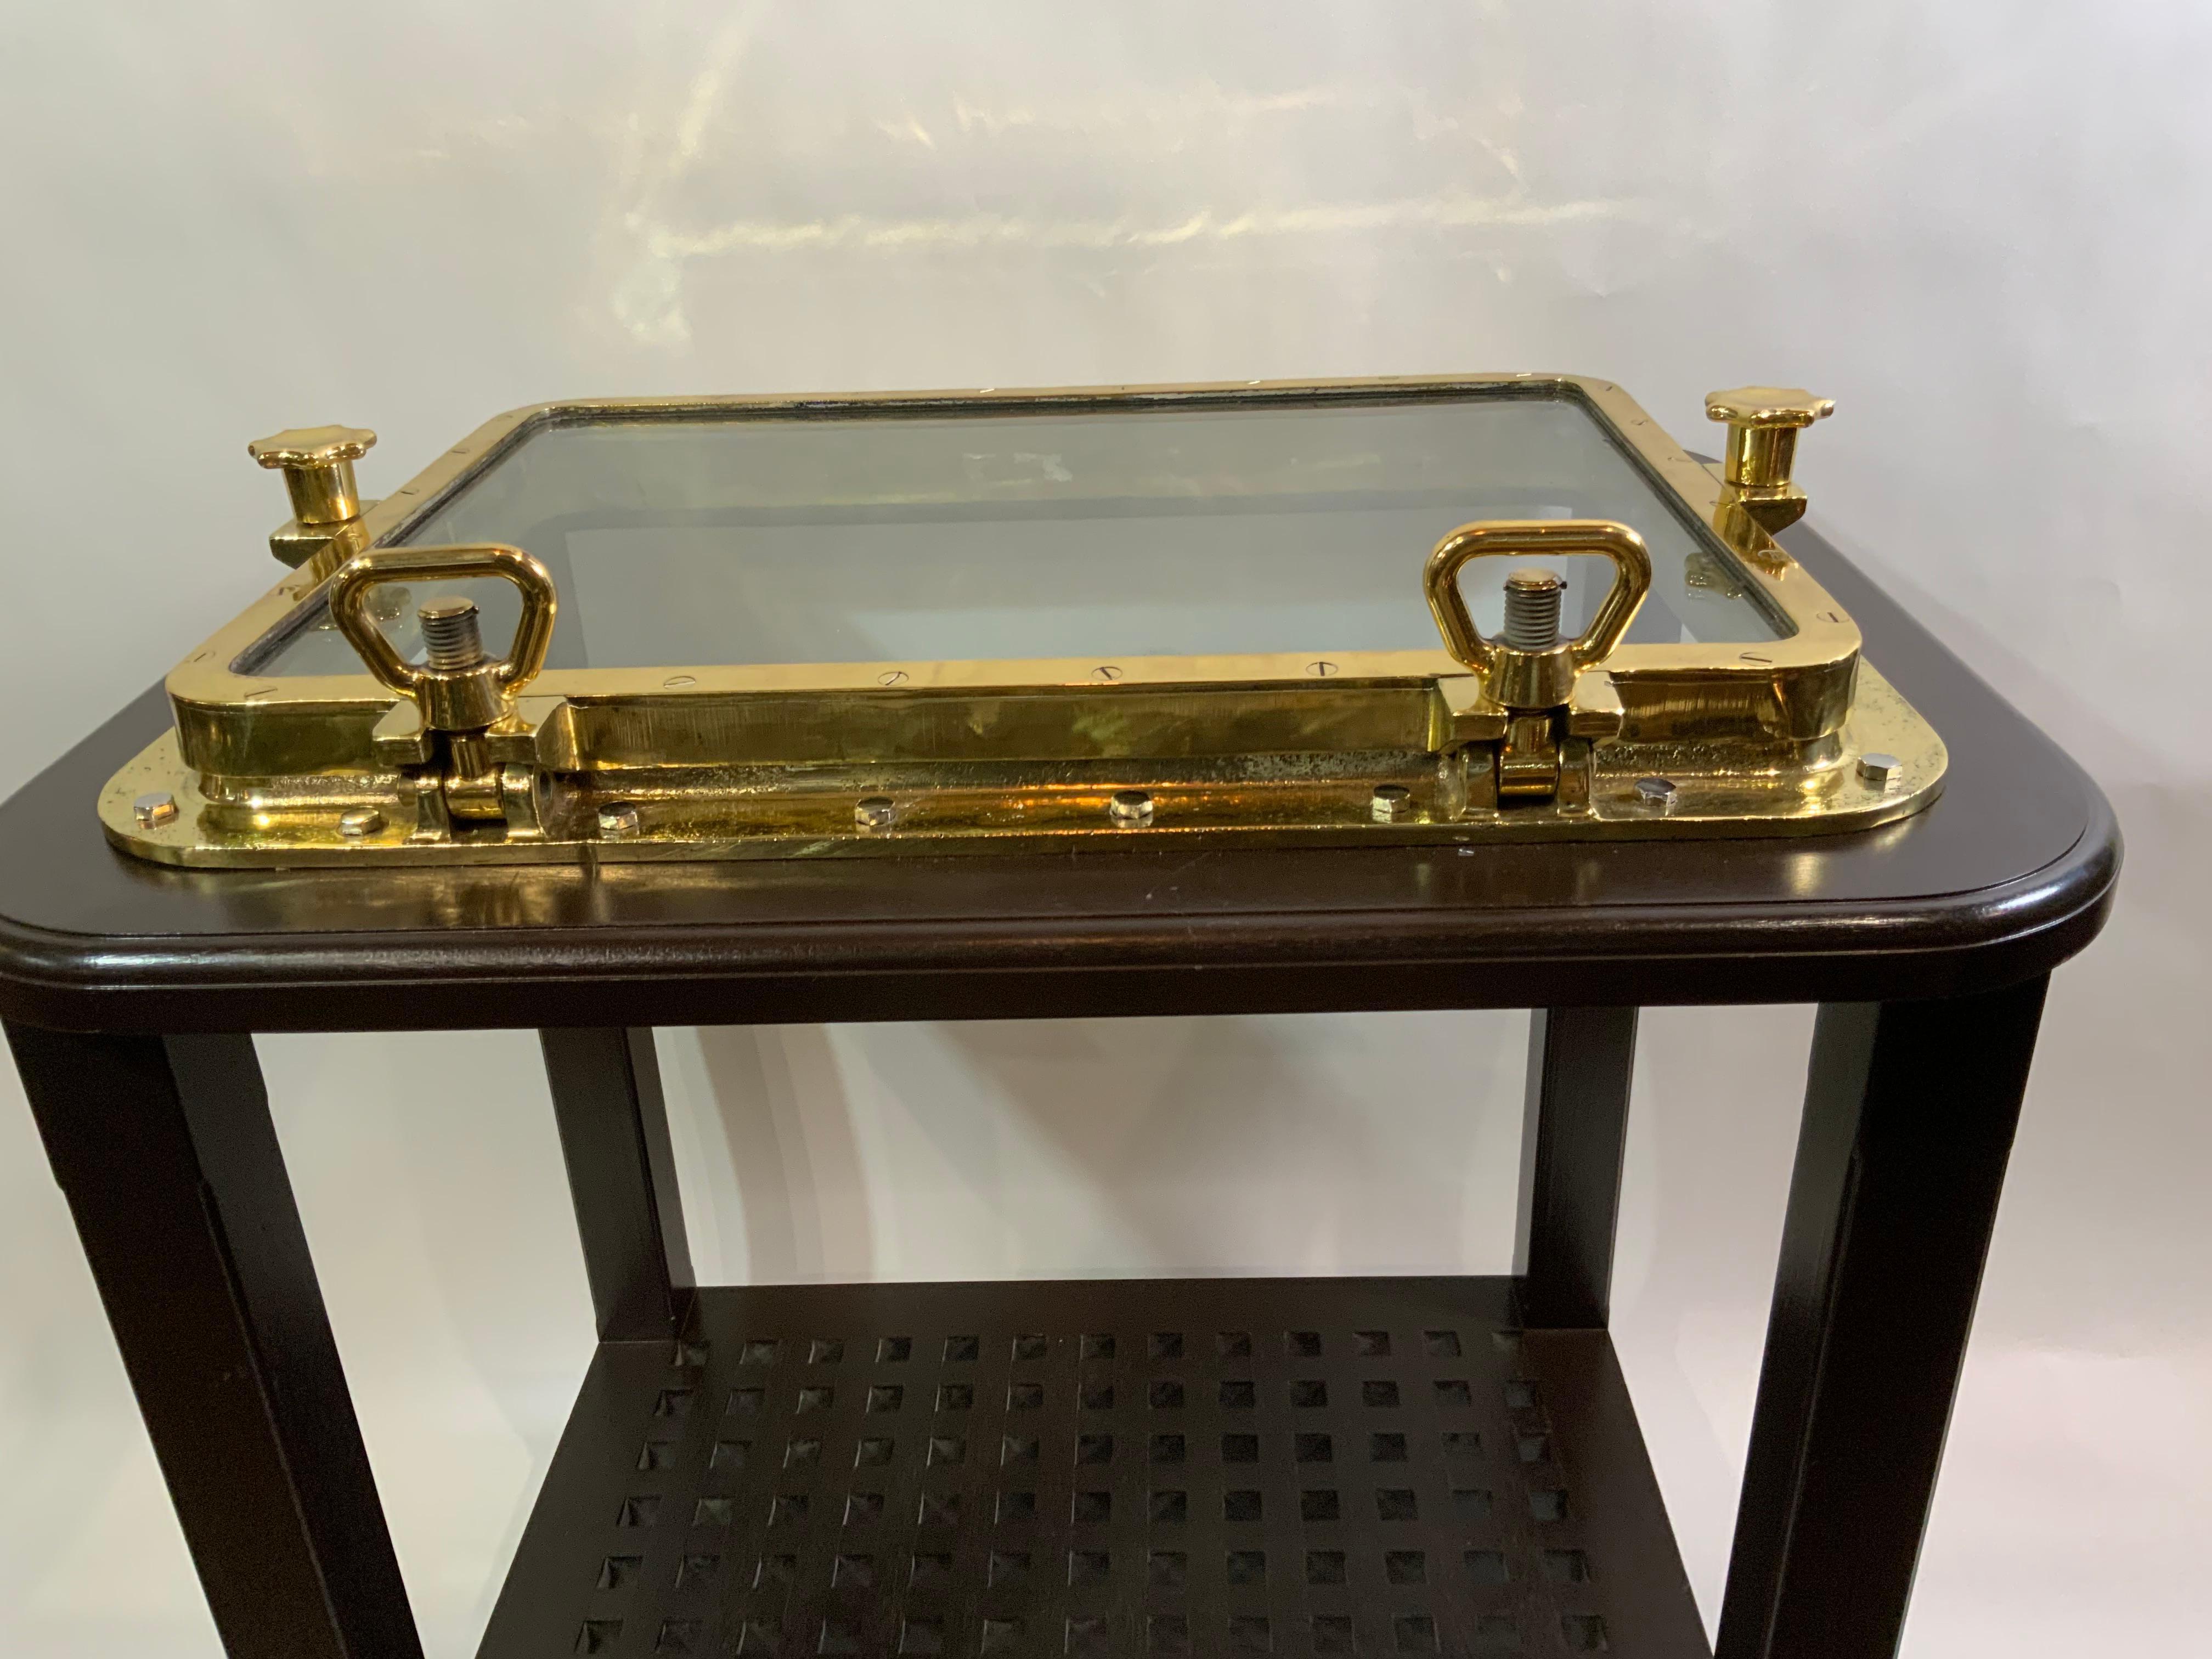 Polished Brass Ships Porthole Table In Good Condition For Sale In Norwell, MA